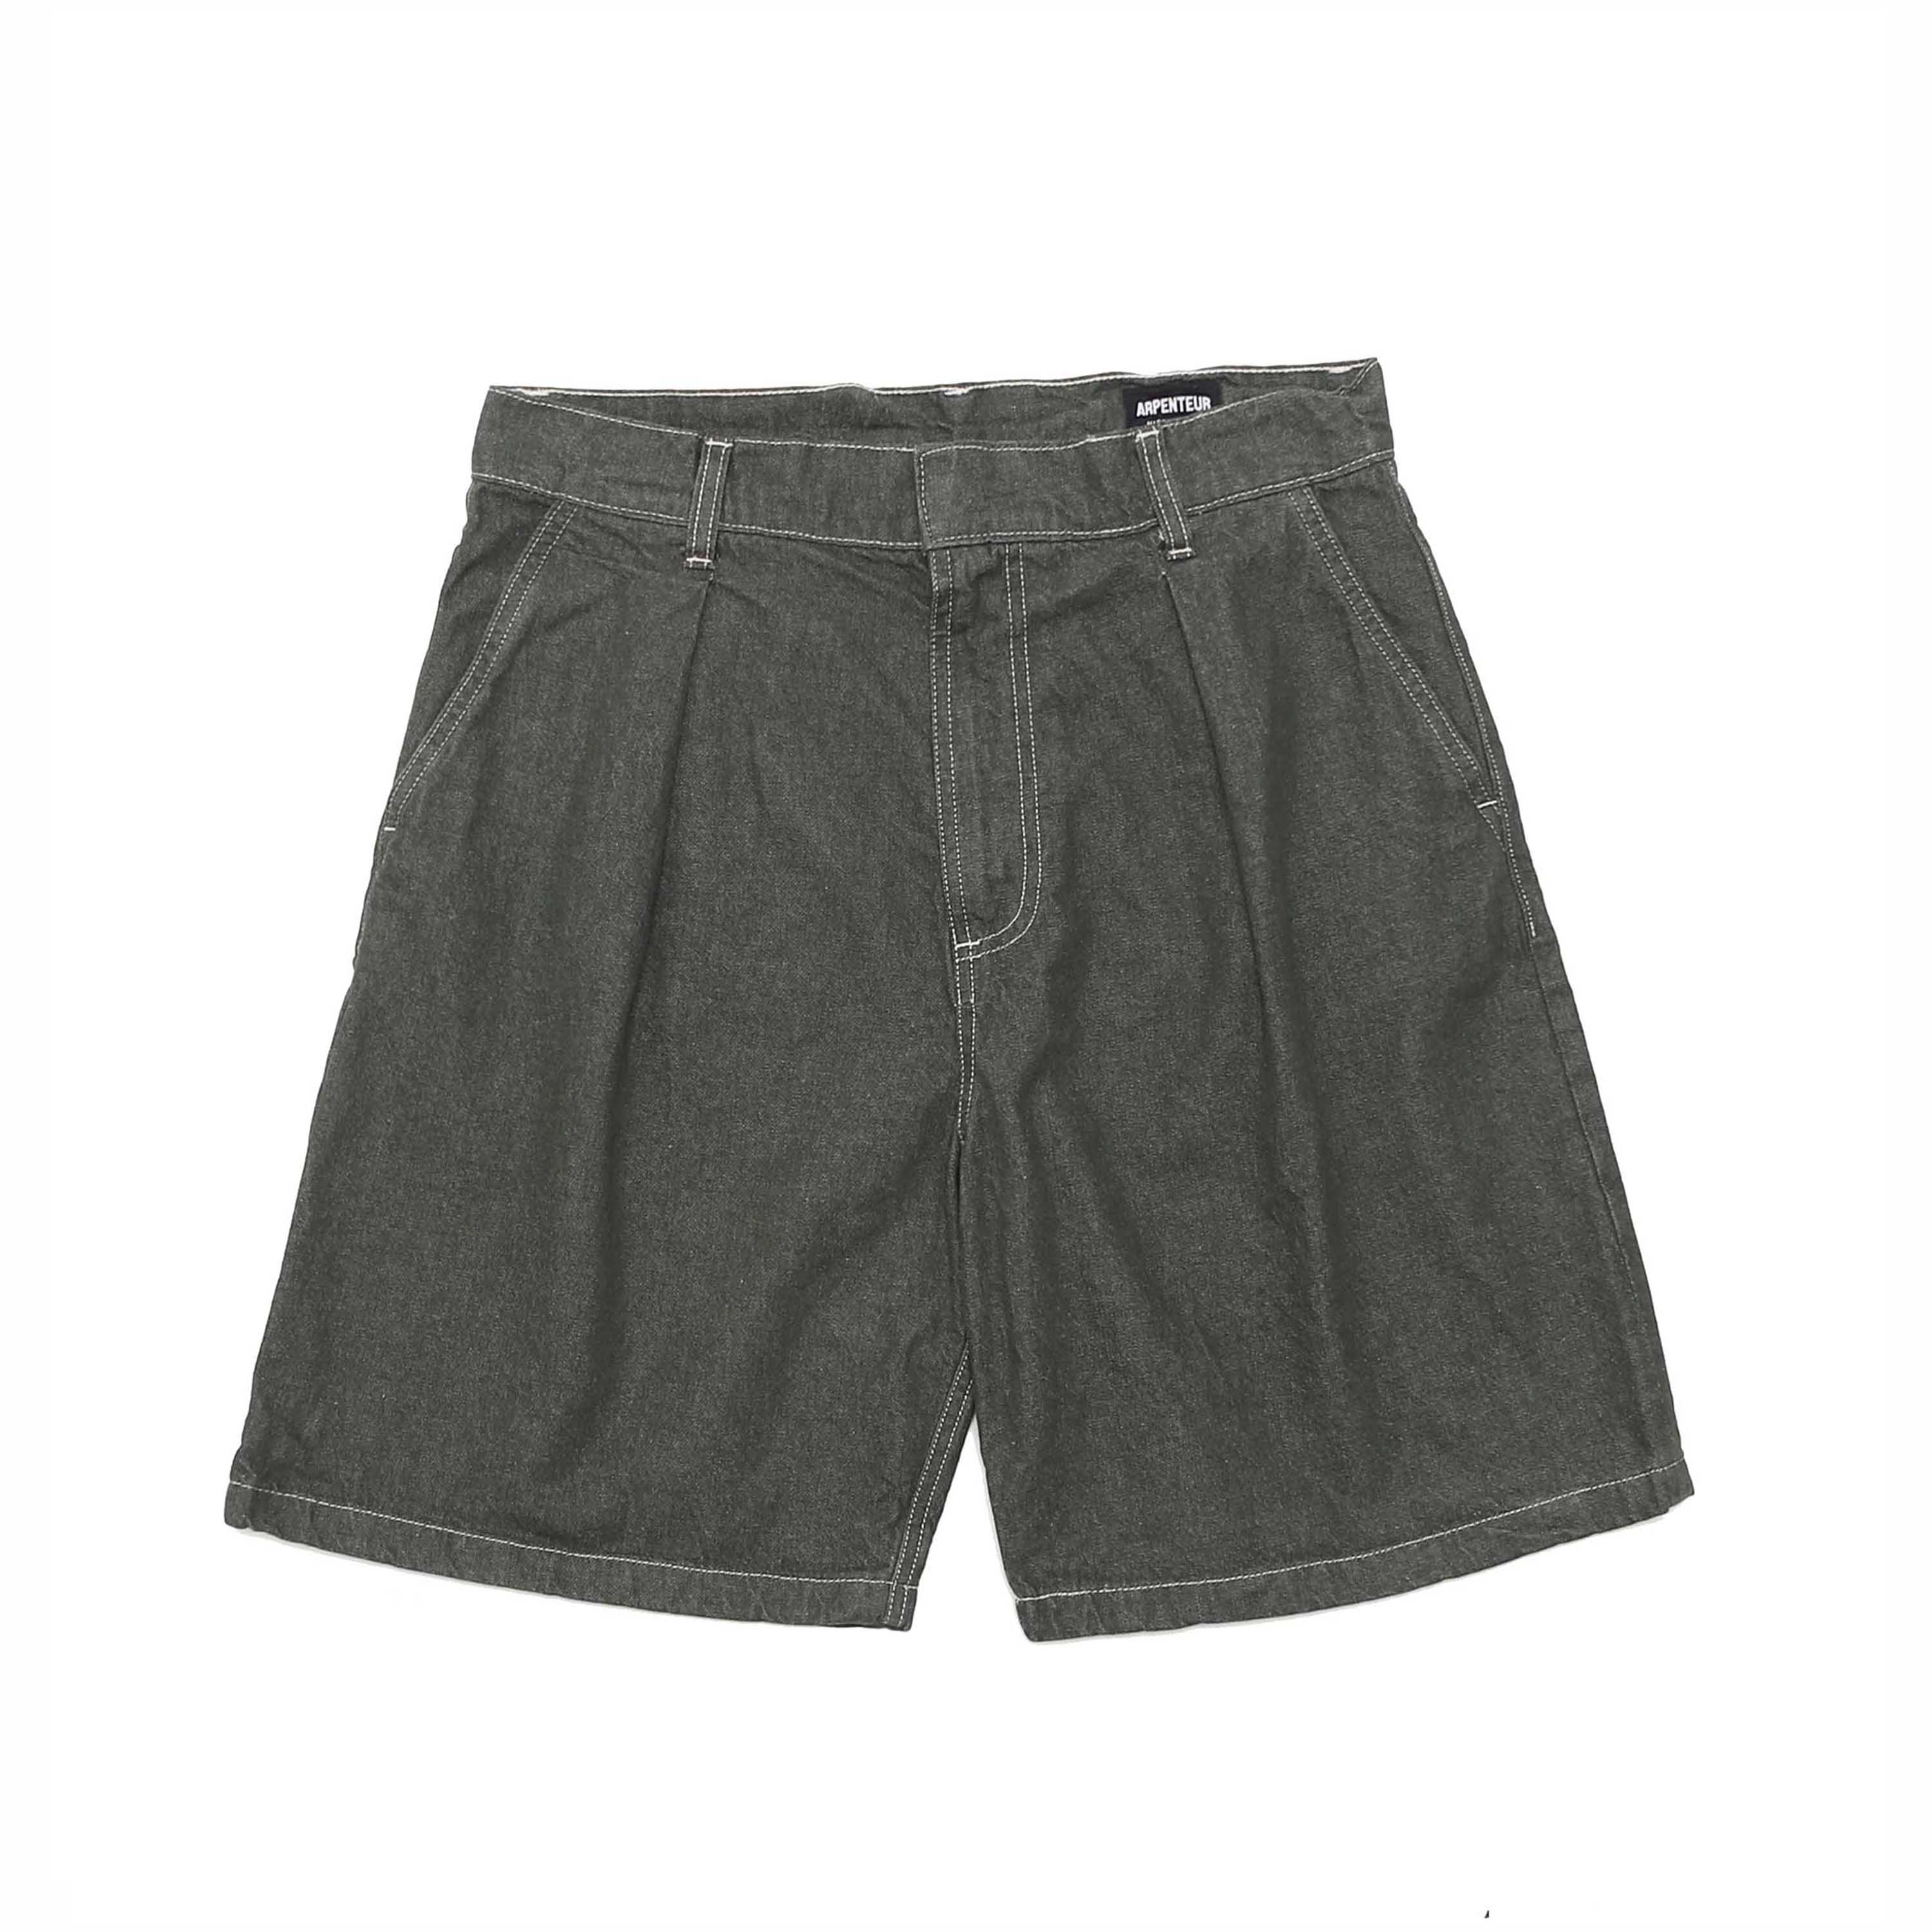 PAGE STONE WASHED DENIM SHORTS - GREEN